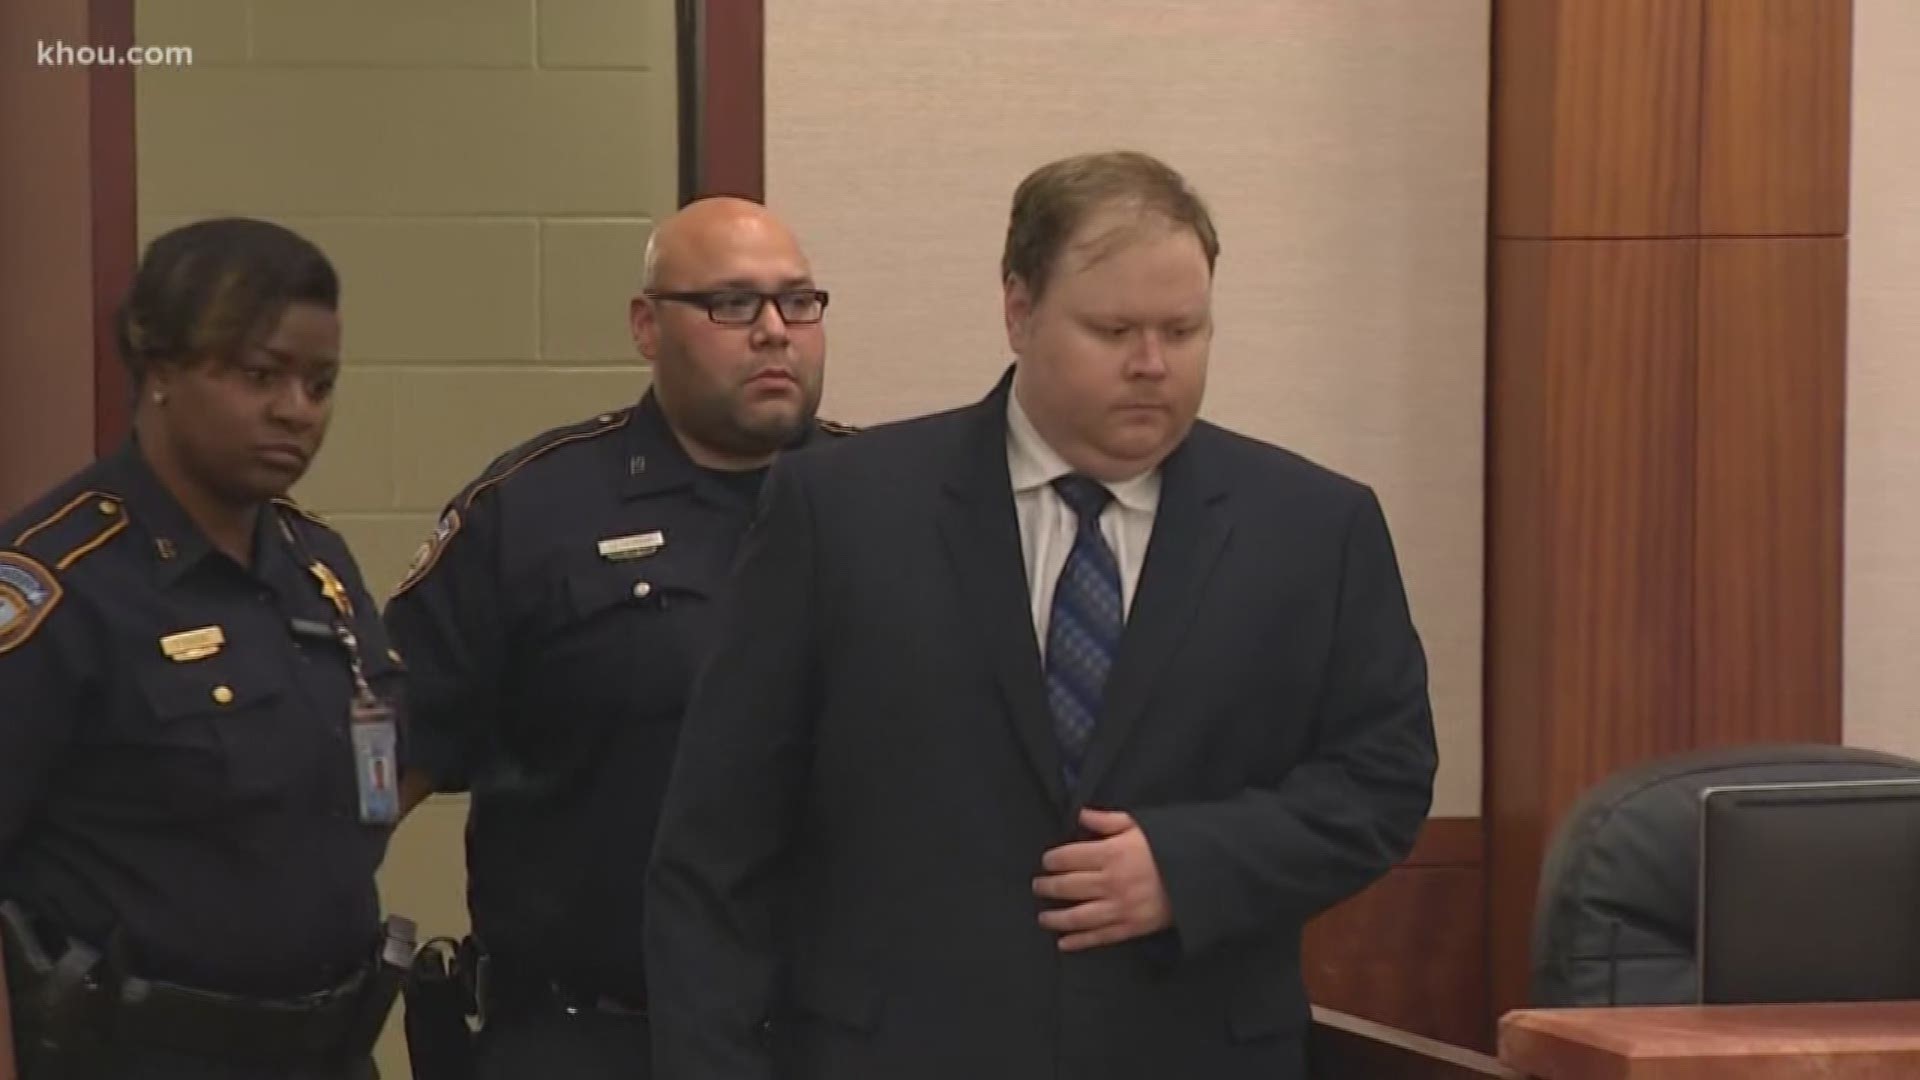 Jurors found Ronald Haskell guilty of capital murder Thursday for the 2014 execution-style murders of his ex-wife's sister, her husband & their four young children.